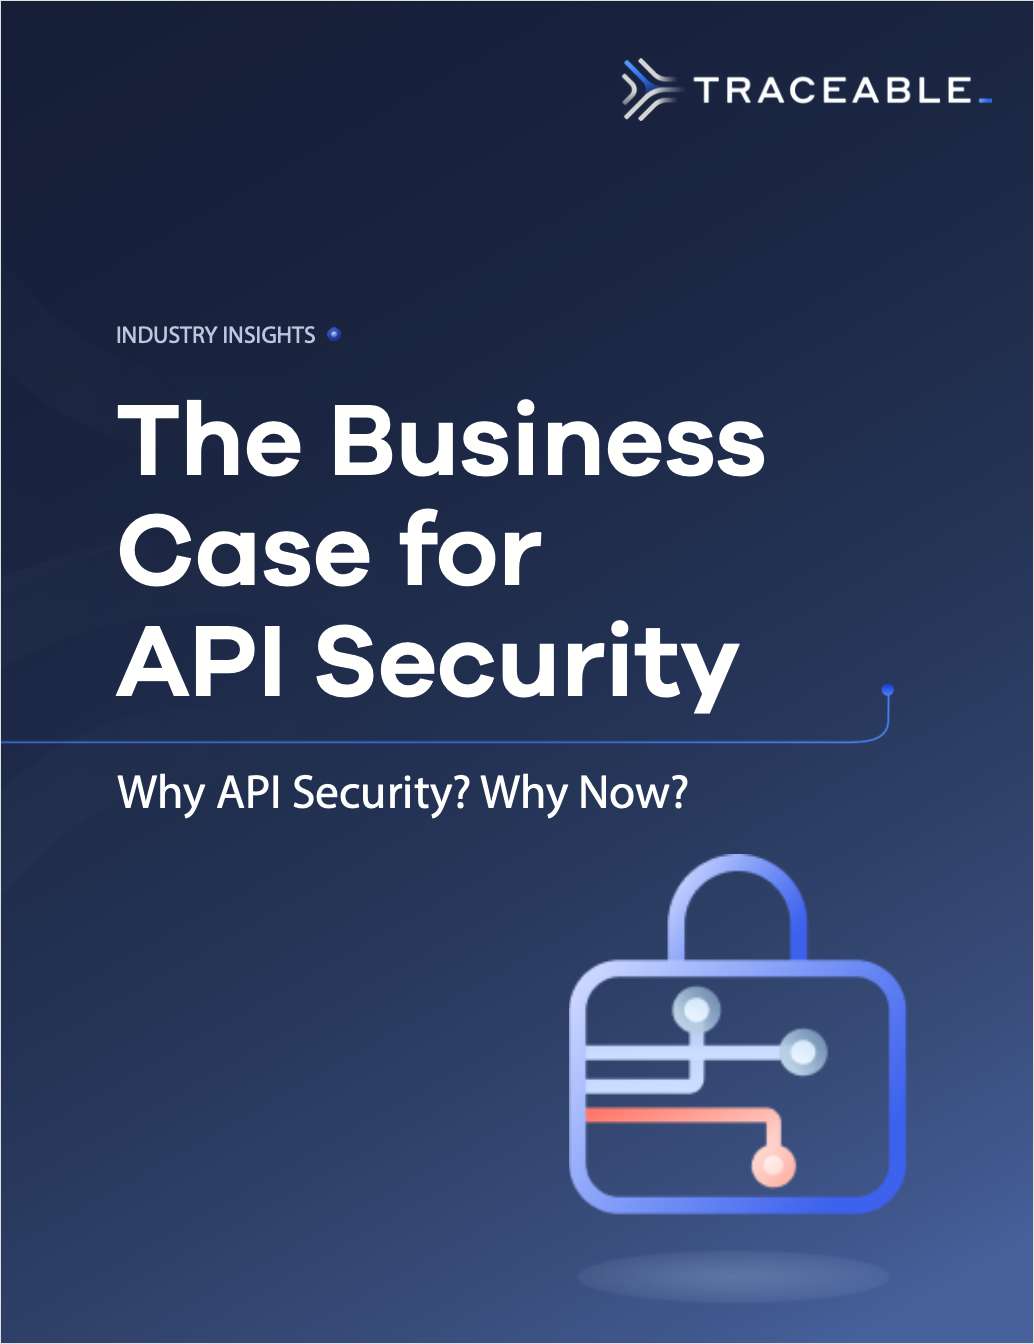 The Business Case for API Security